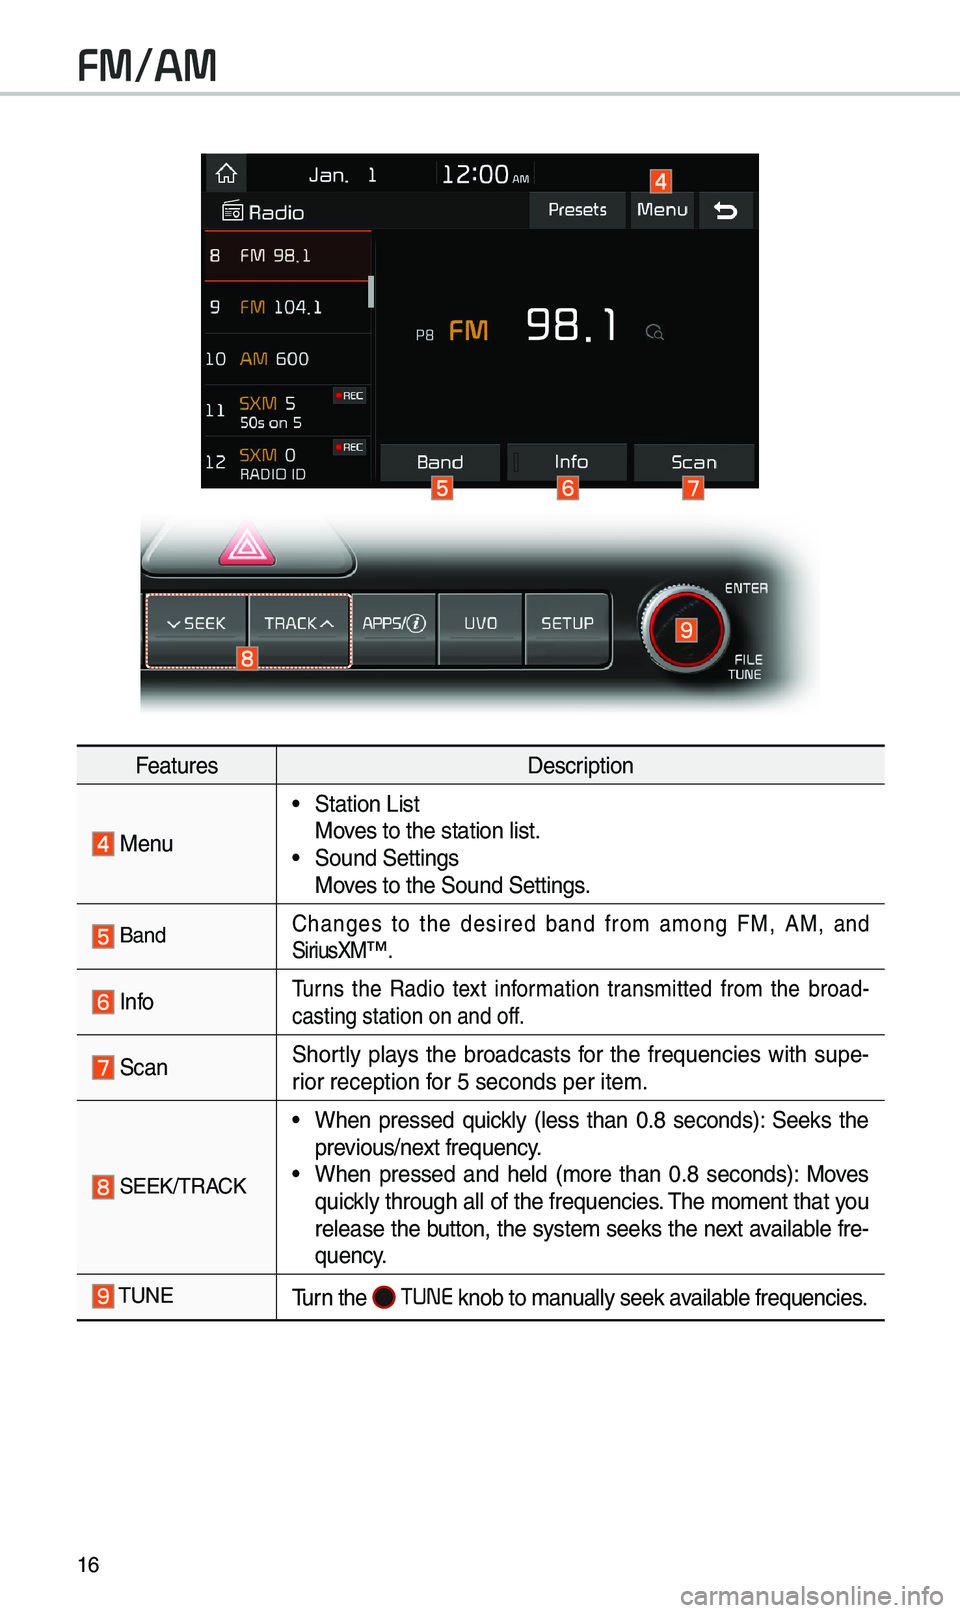 KIA SPORTAGE 2019  Quick Reference Guide 16
FeaturesDescription
  Menu
 •Station List
Moves to t\be station l\iist.
 •Sound Settings
Moves to t\be Sound Sett\iings.
 BandC\banges  to  t\be  desired  band  from  among  FM,  AM,  and 
Siri